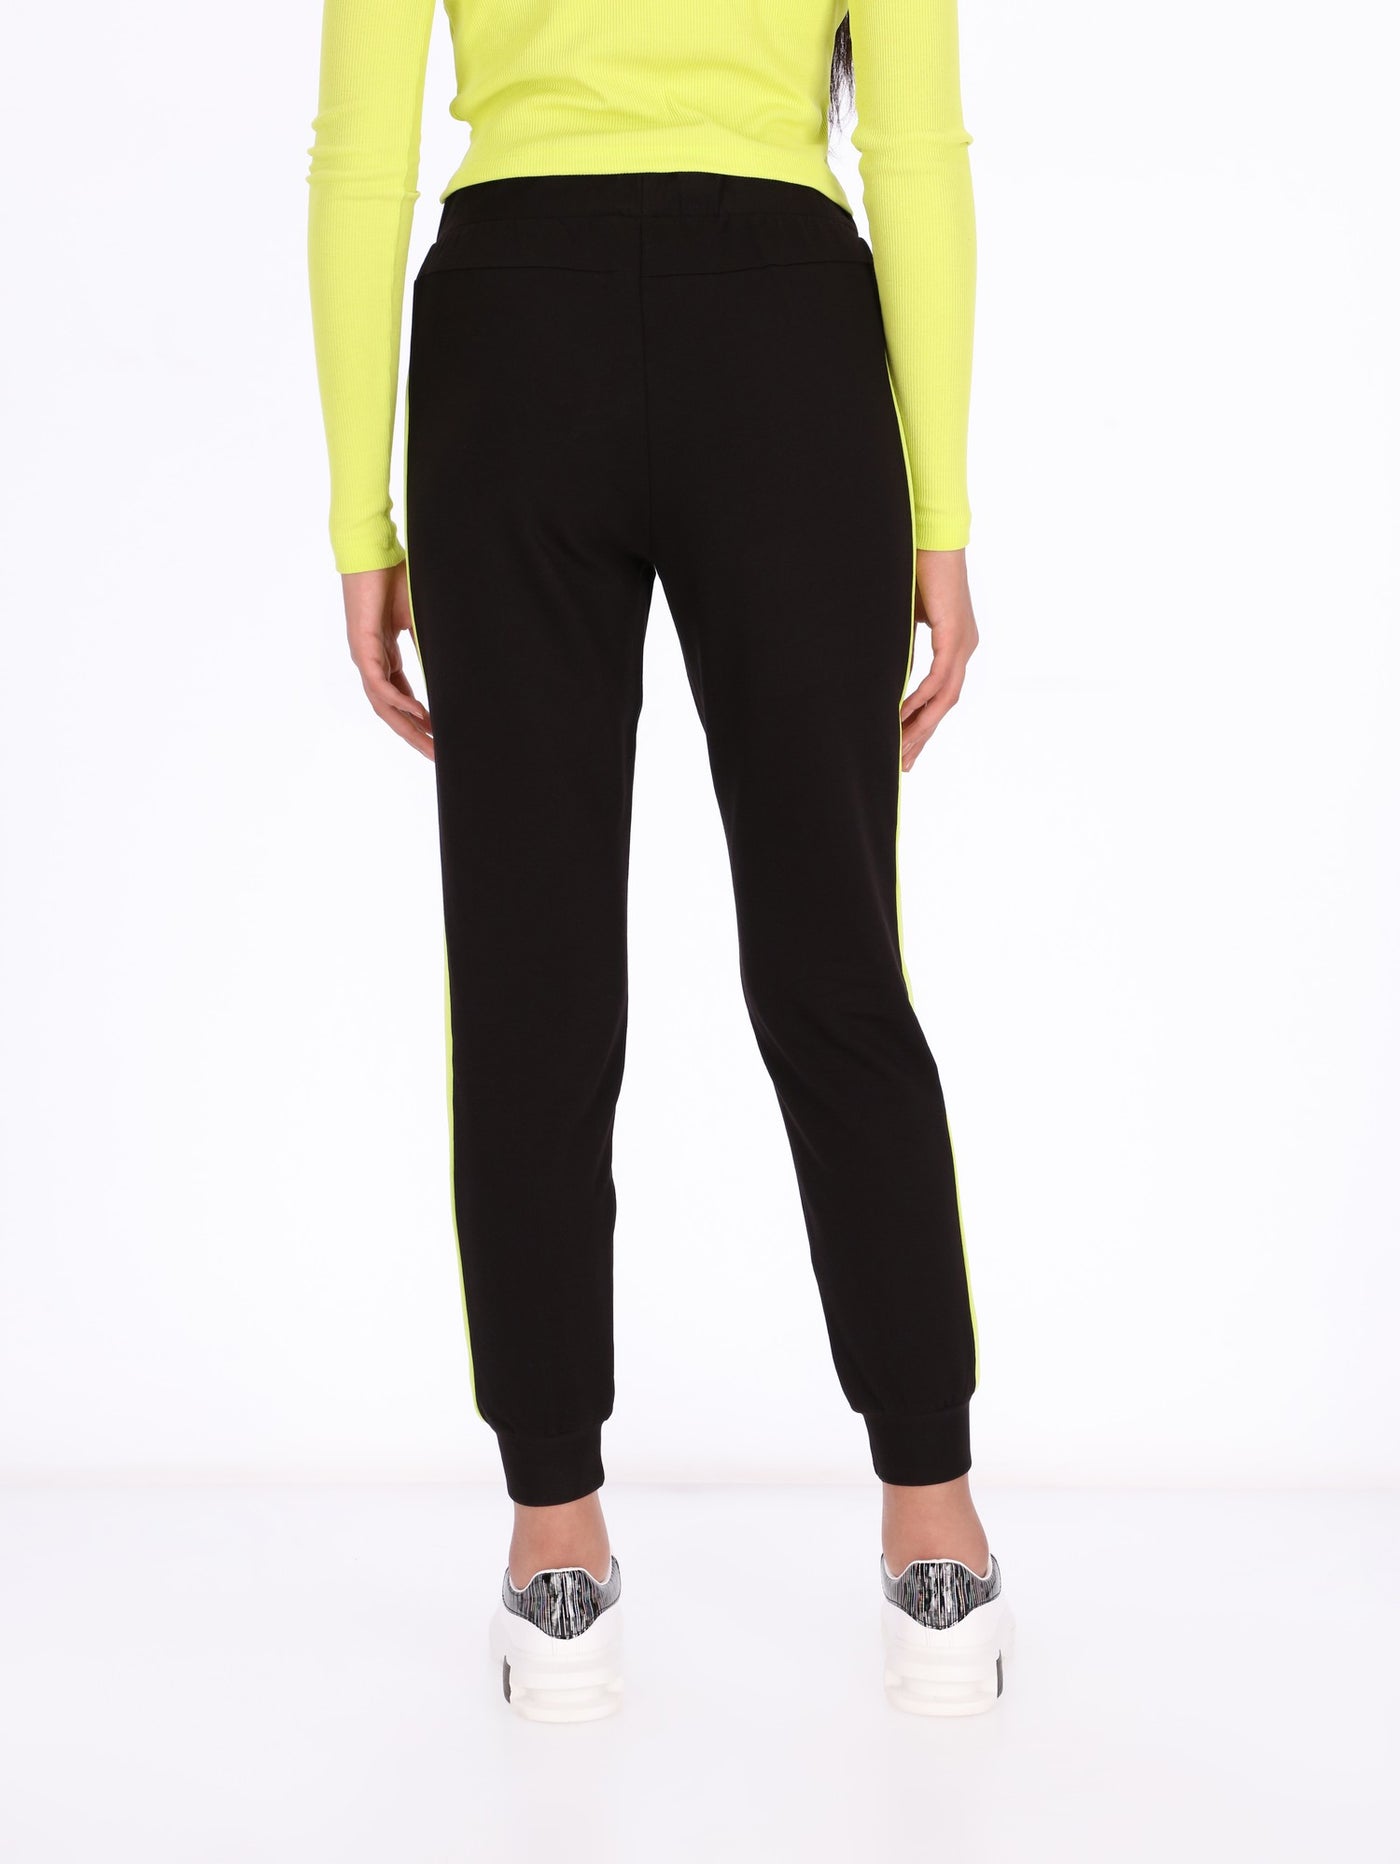  OR Women's Contrast Side Trim Joggers